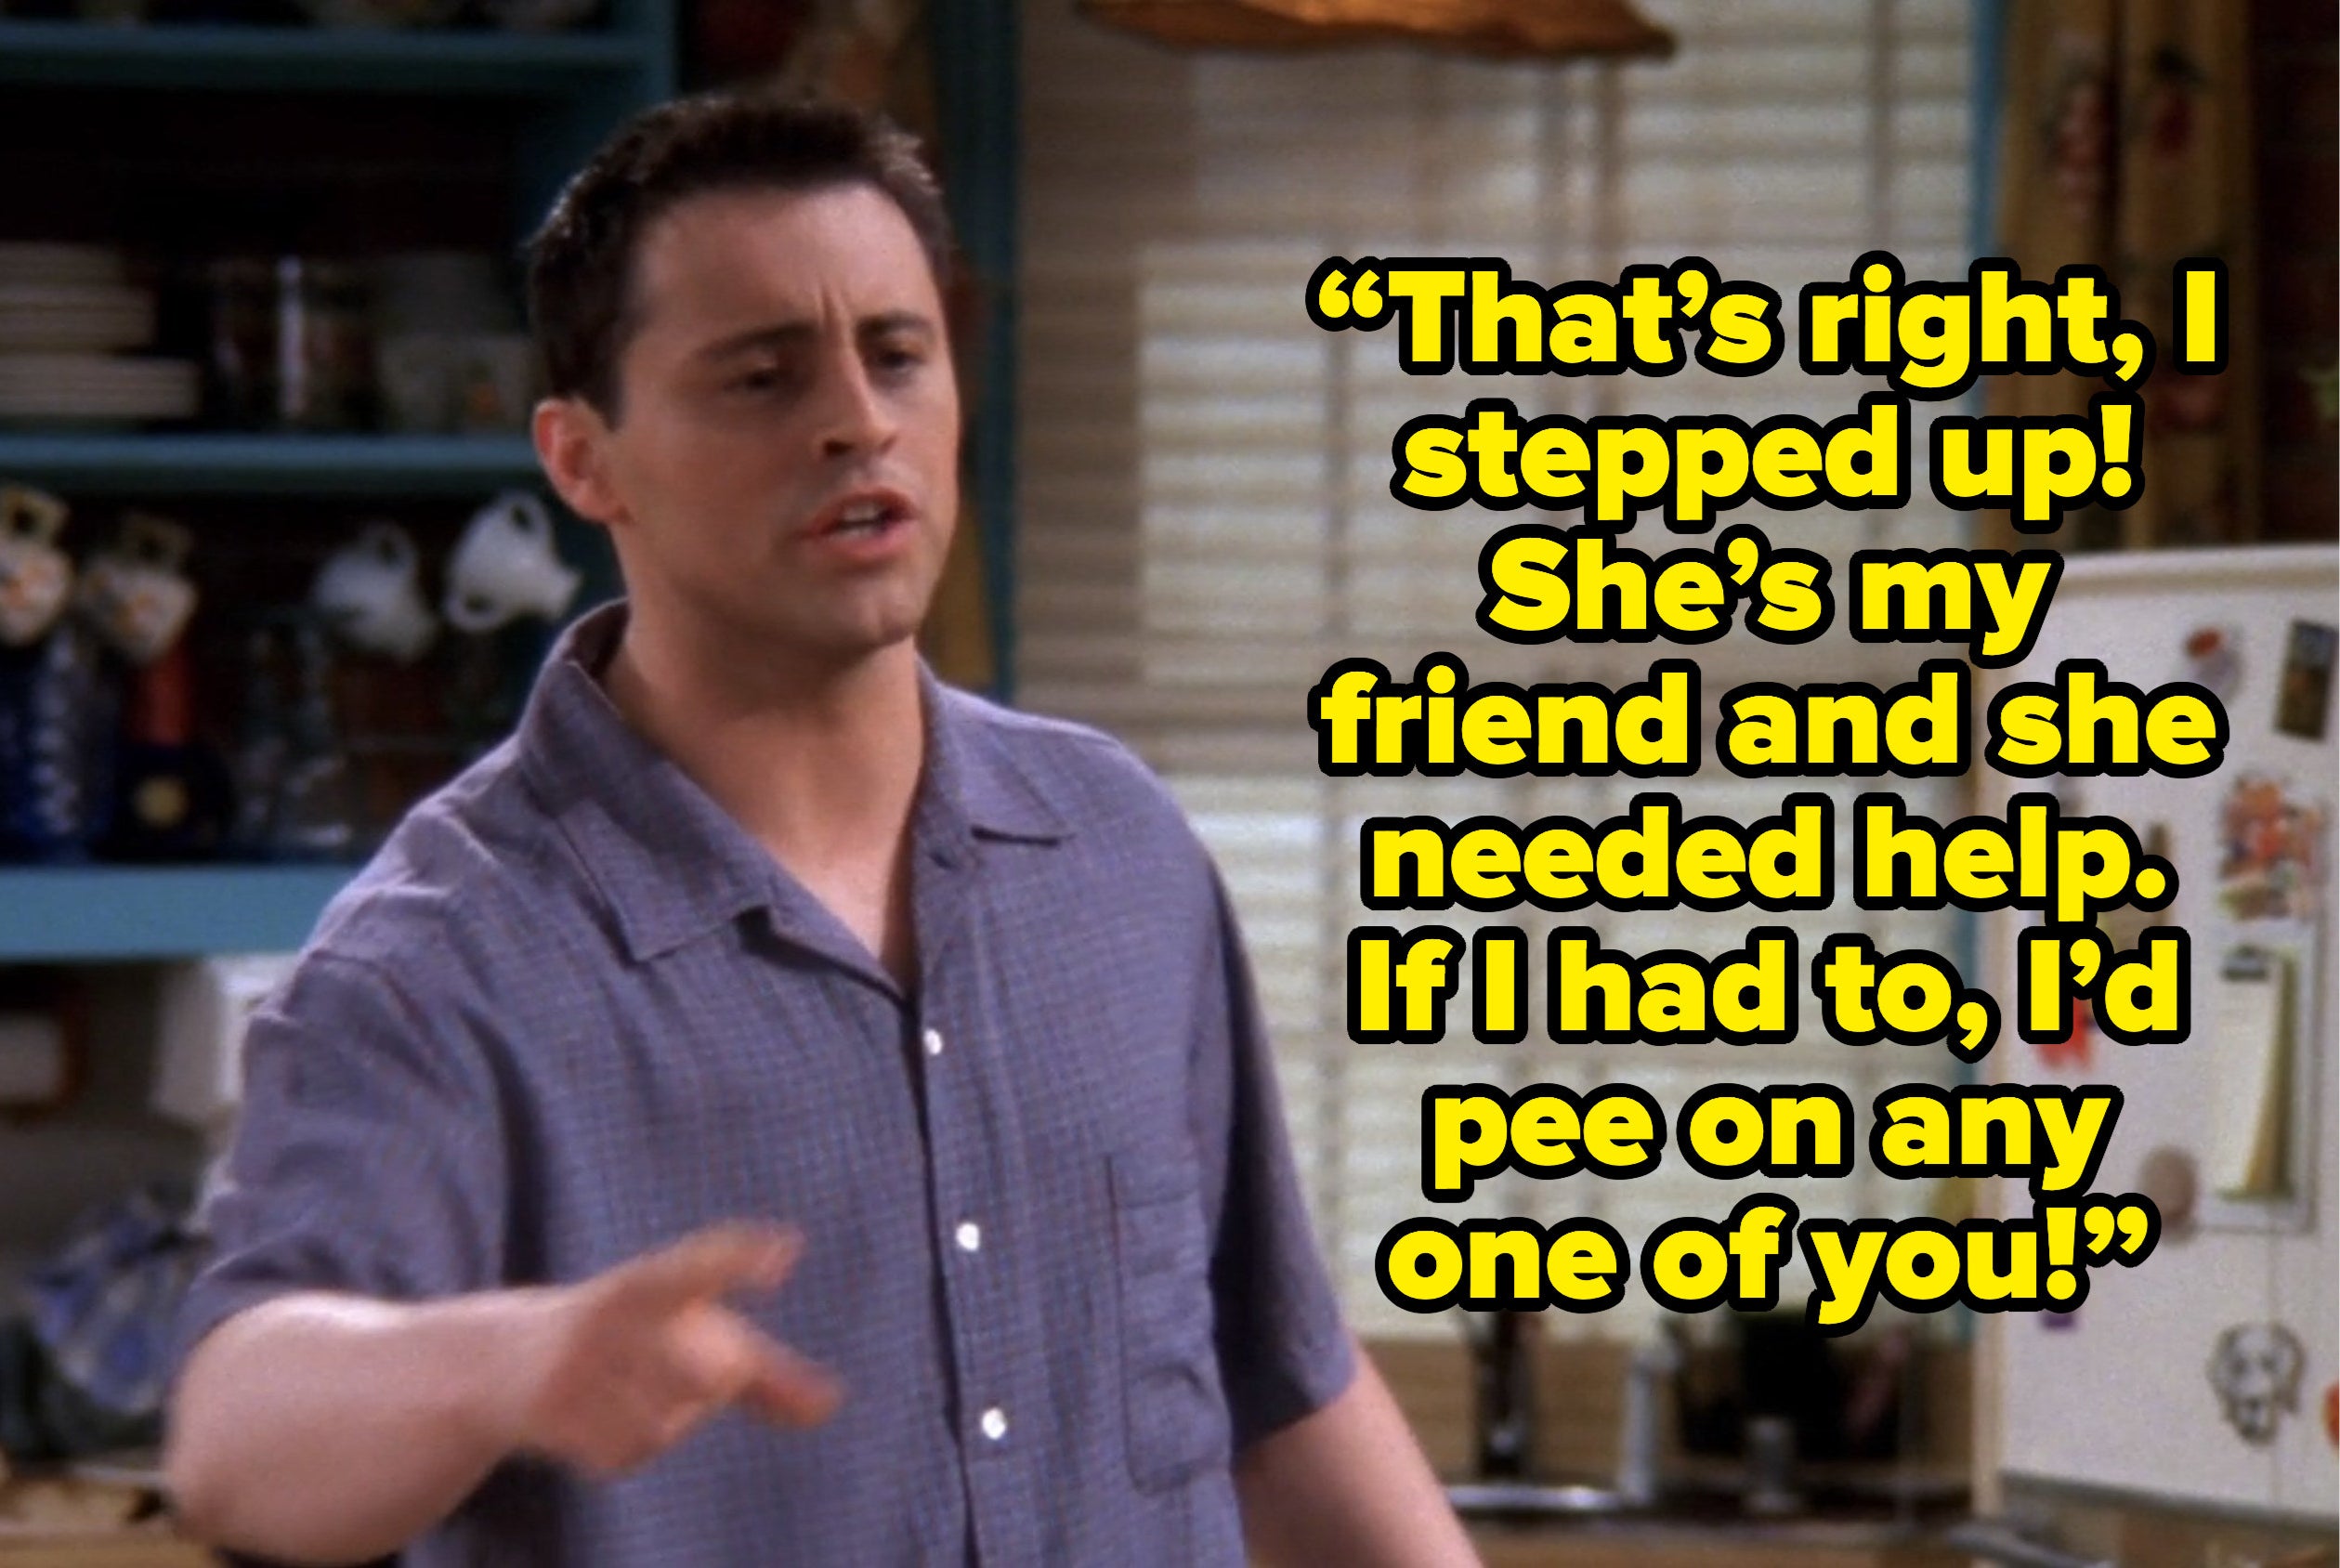 joey saying “That’s right, I stepped up! She’s my friend and she needed help. If I had to, I’d pee on any one of you!” on friends